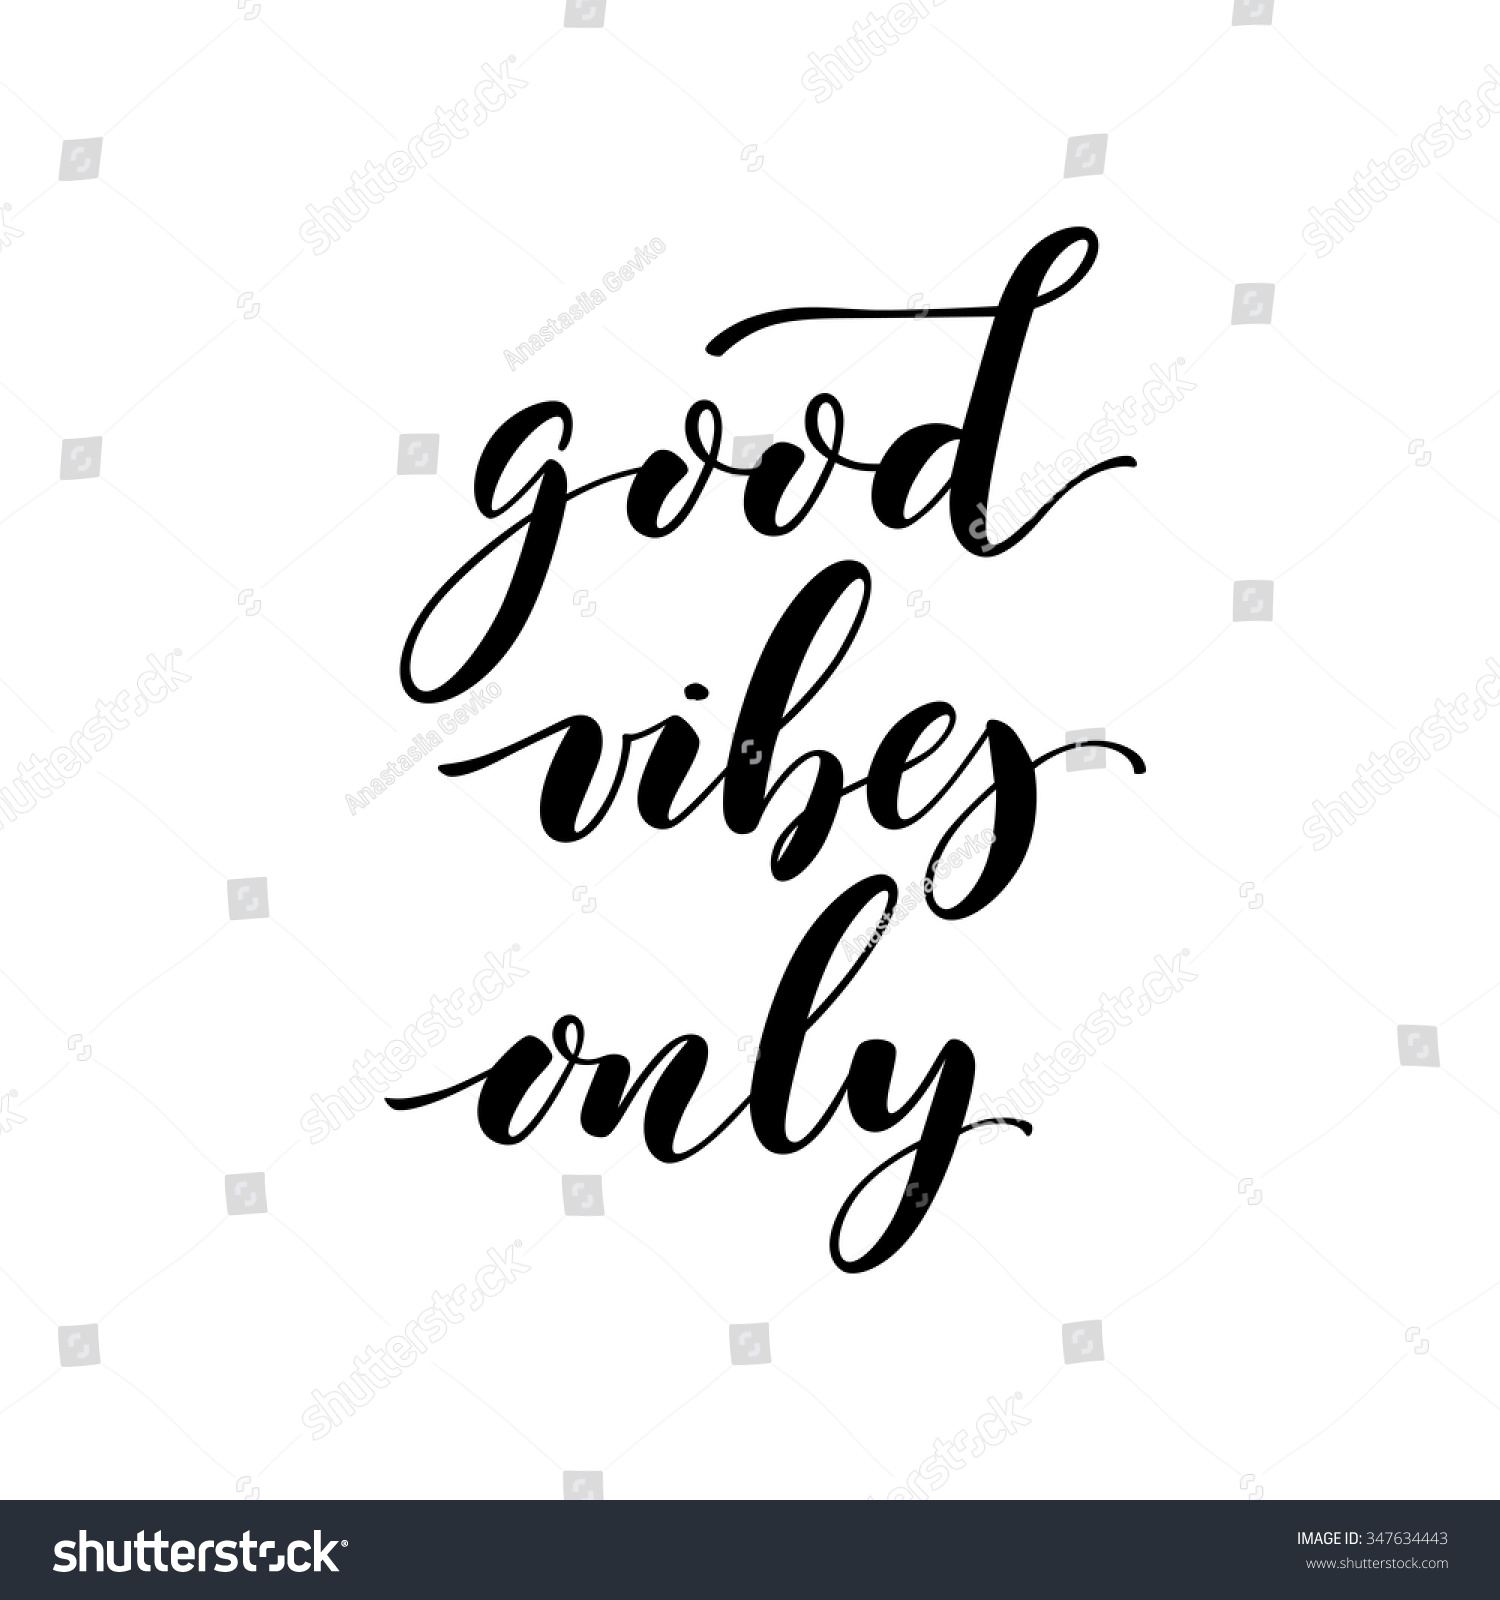 Good Vibes Only Card Hand Drawn Stock Vector 347634443 - Shutterstock